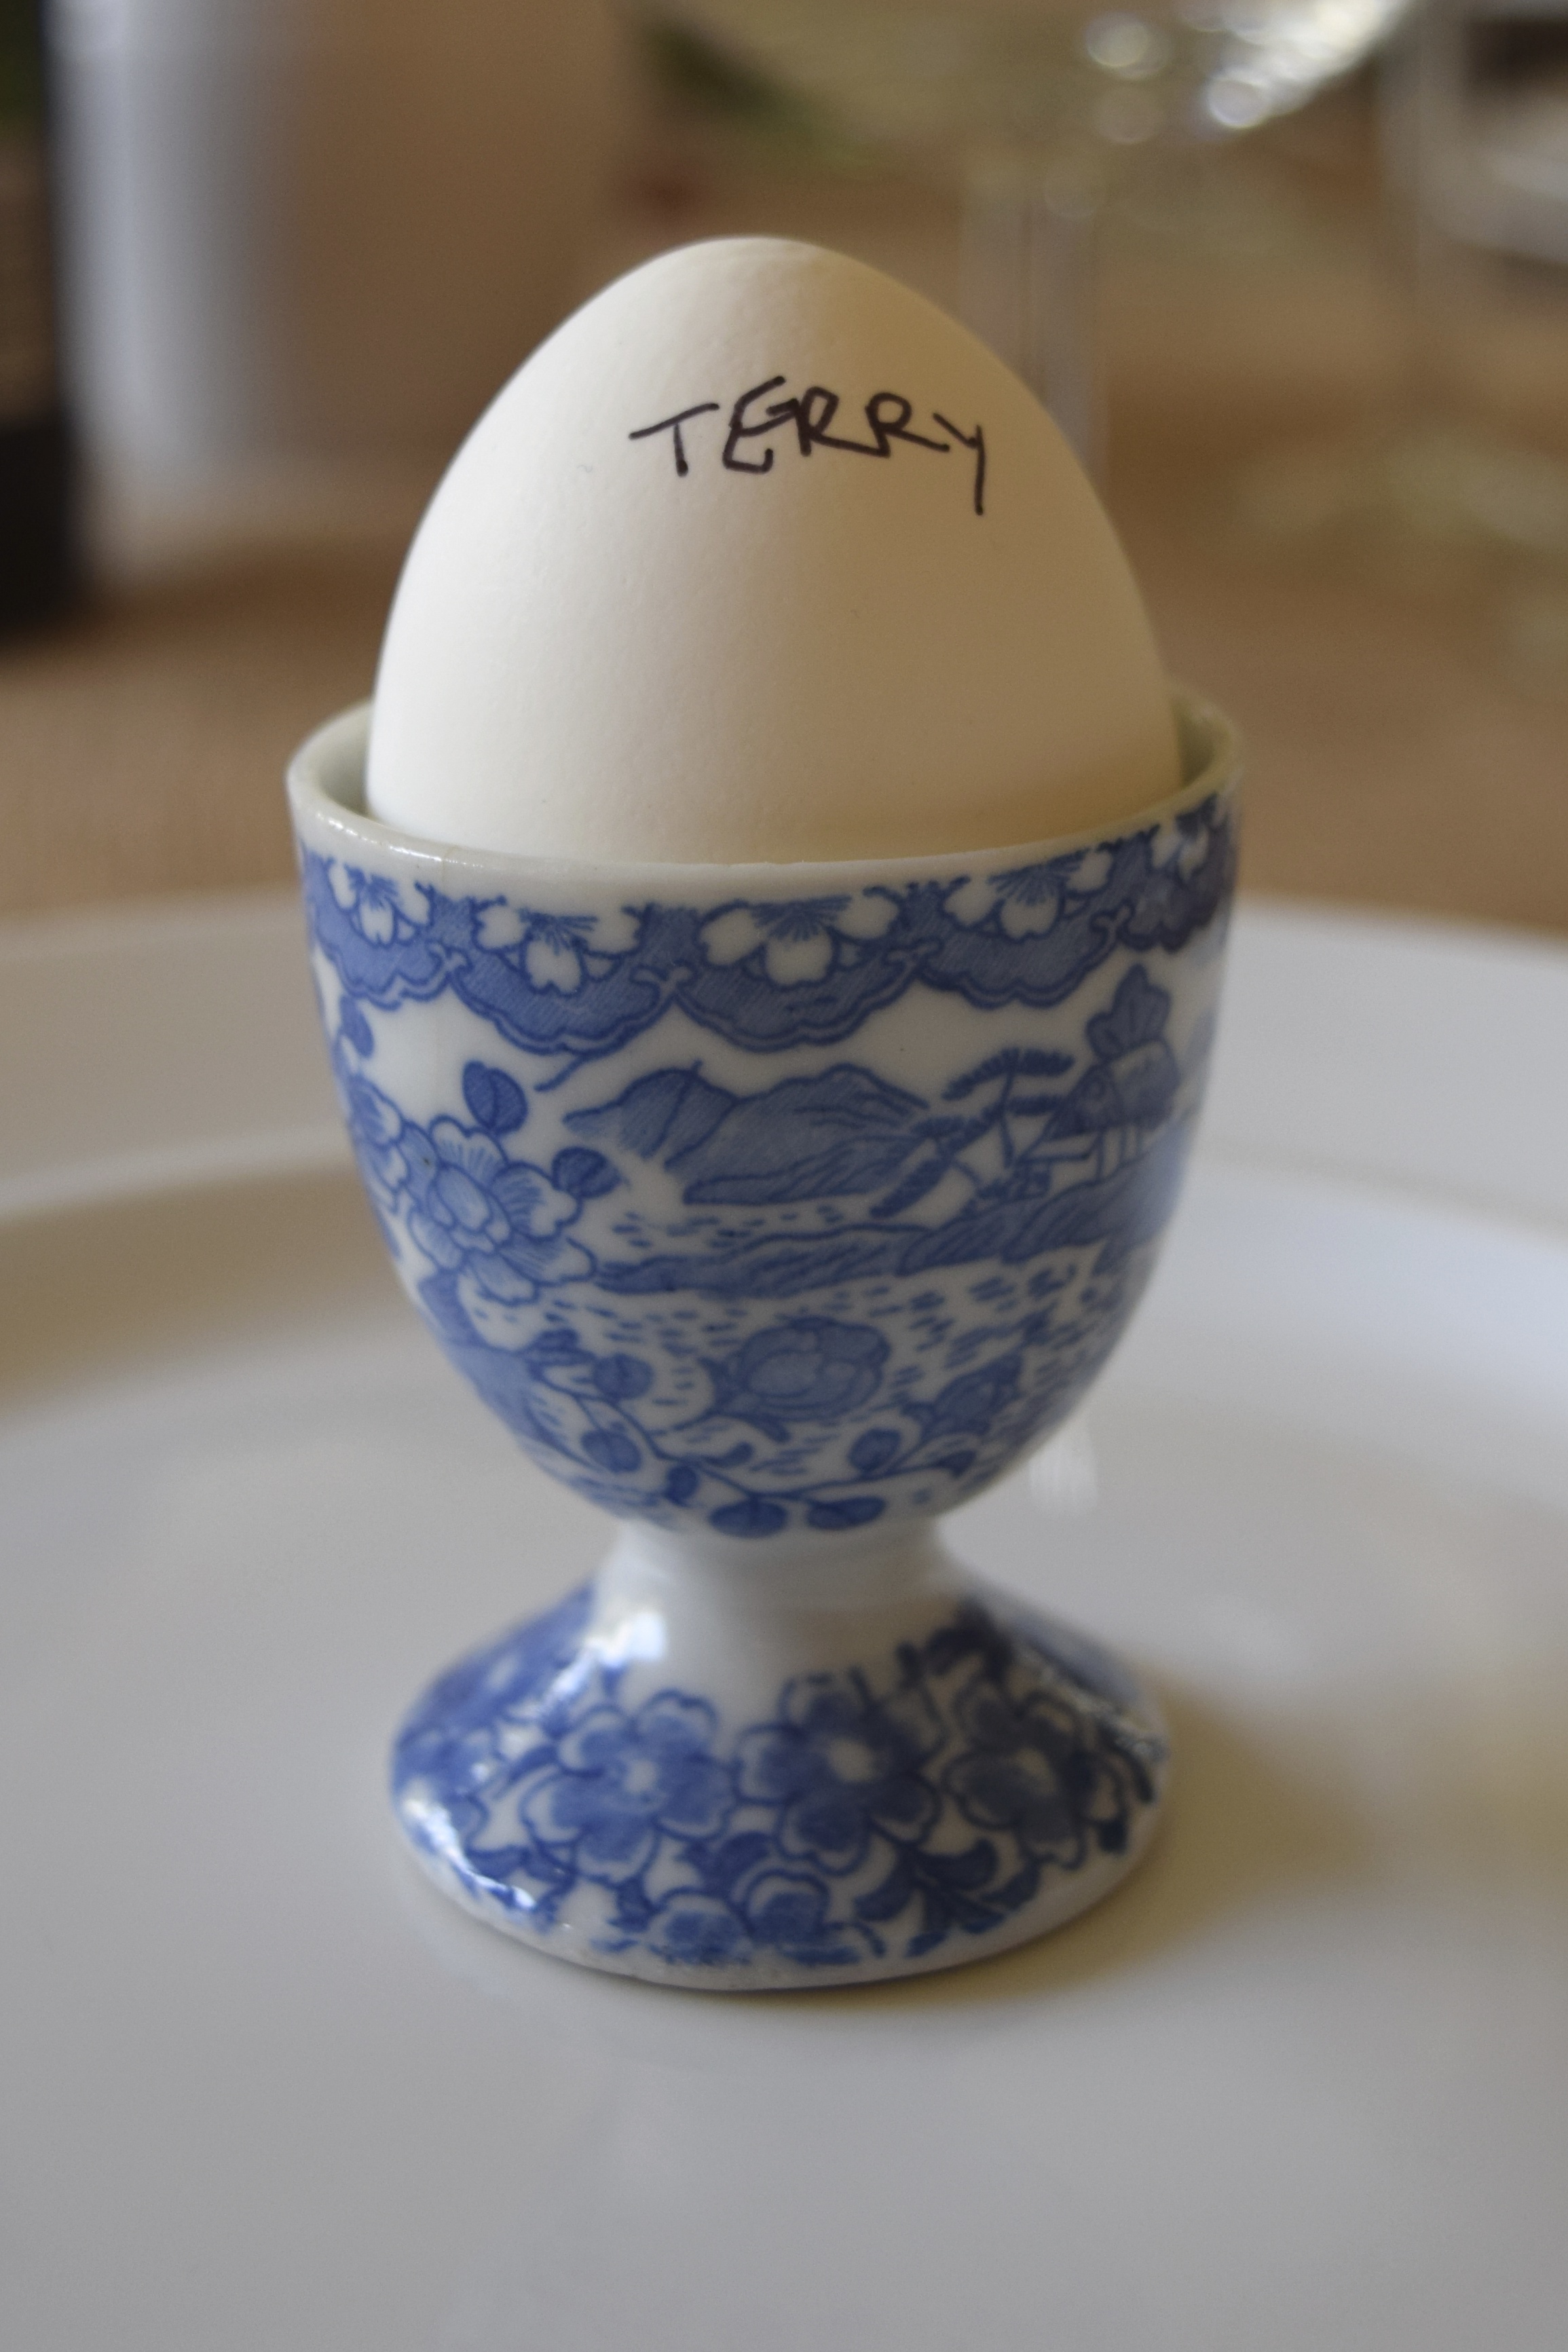 terry egg cup